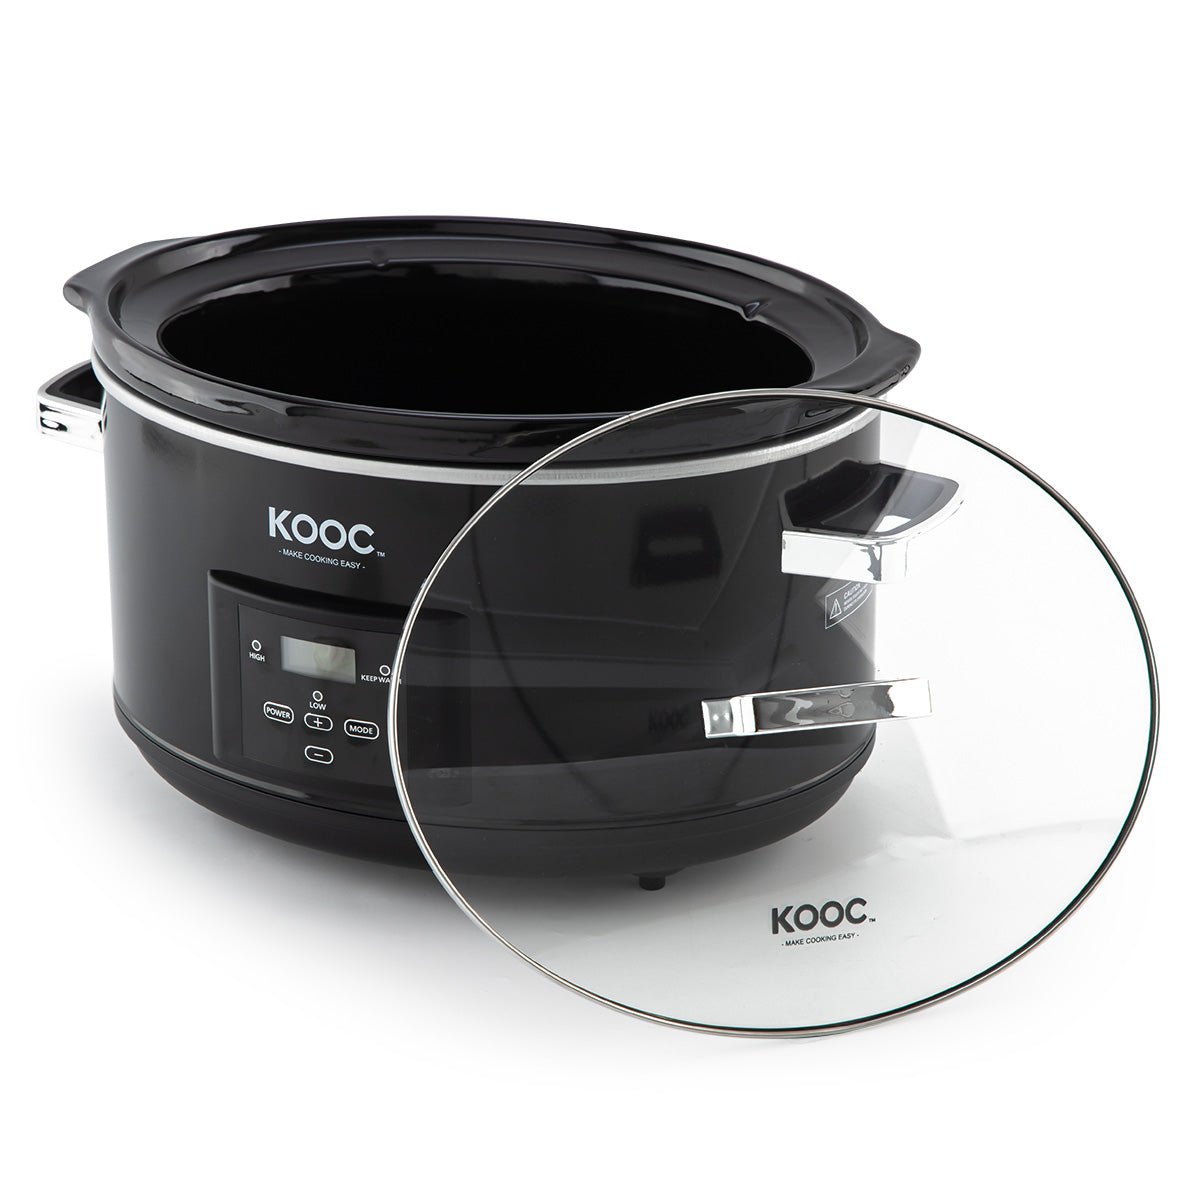 KOOC - Small Slow Cooker - 2 Quart, Pink, with Free Liners – KOOC Official